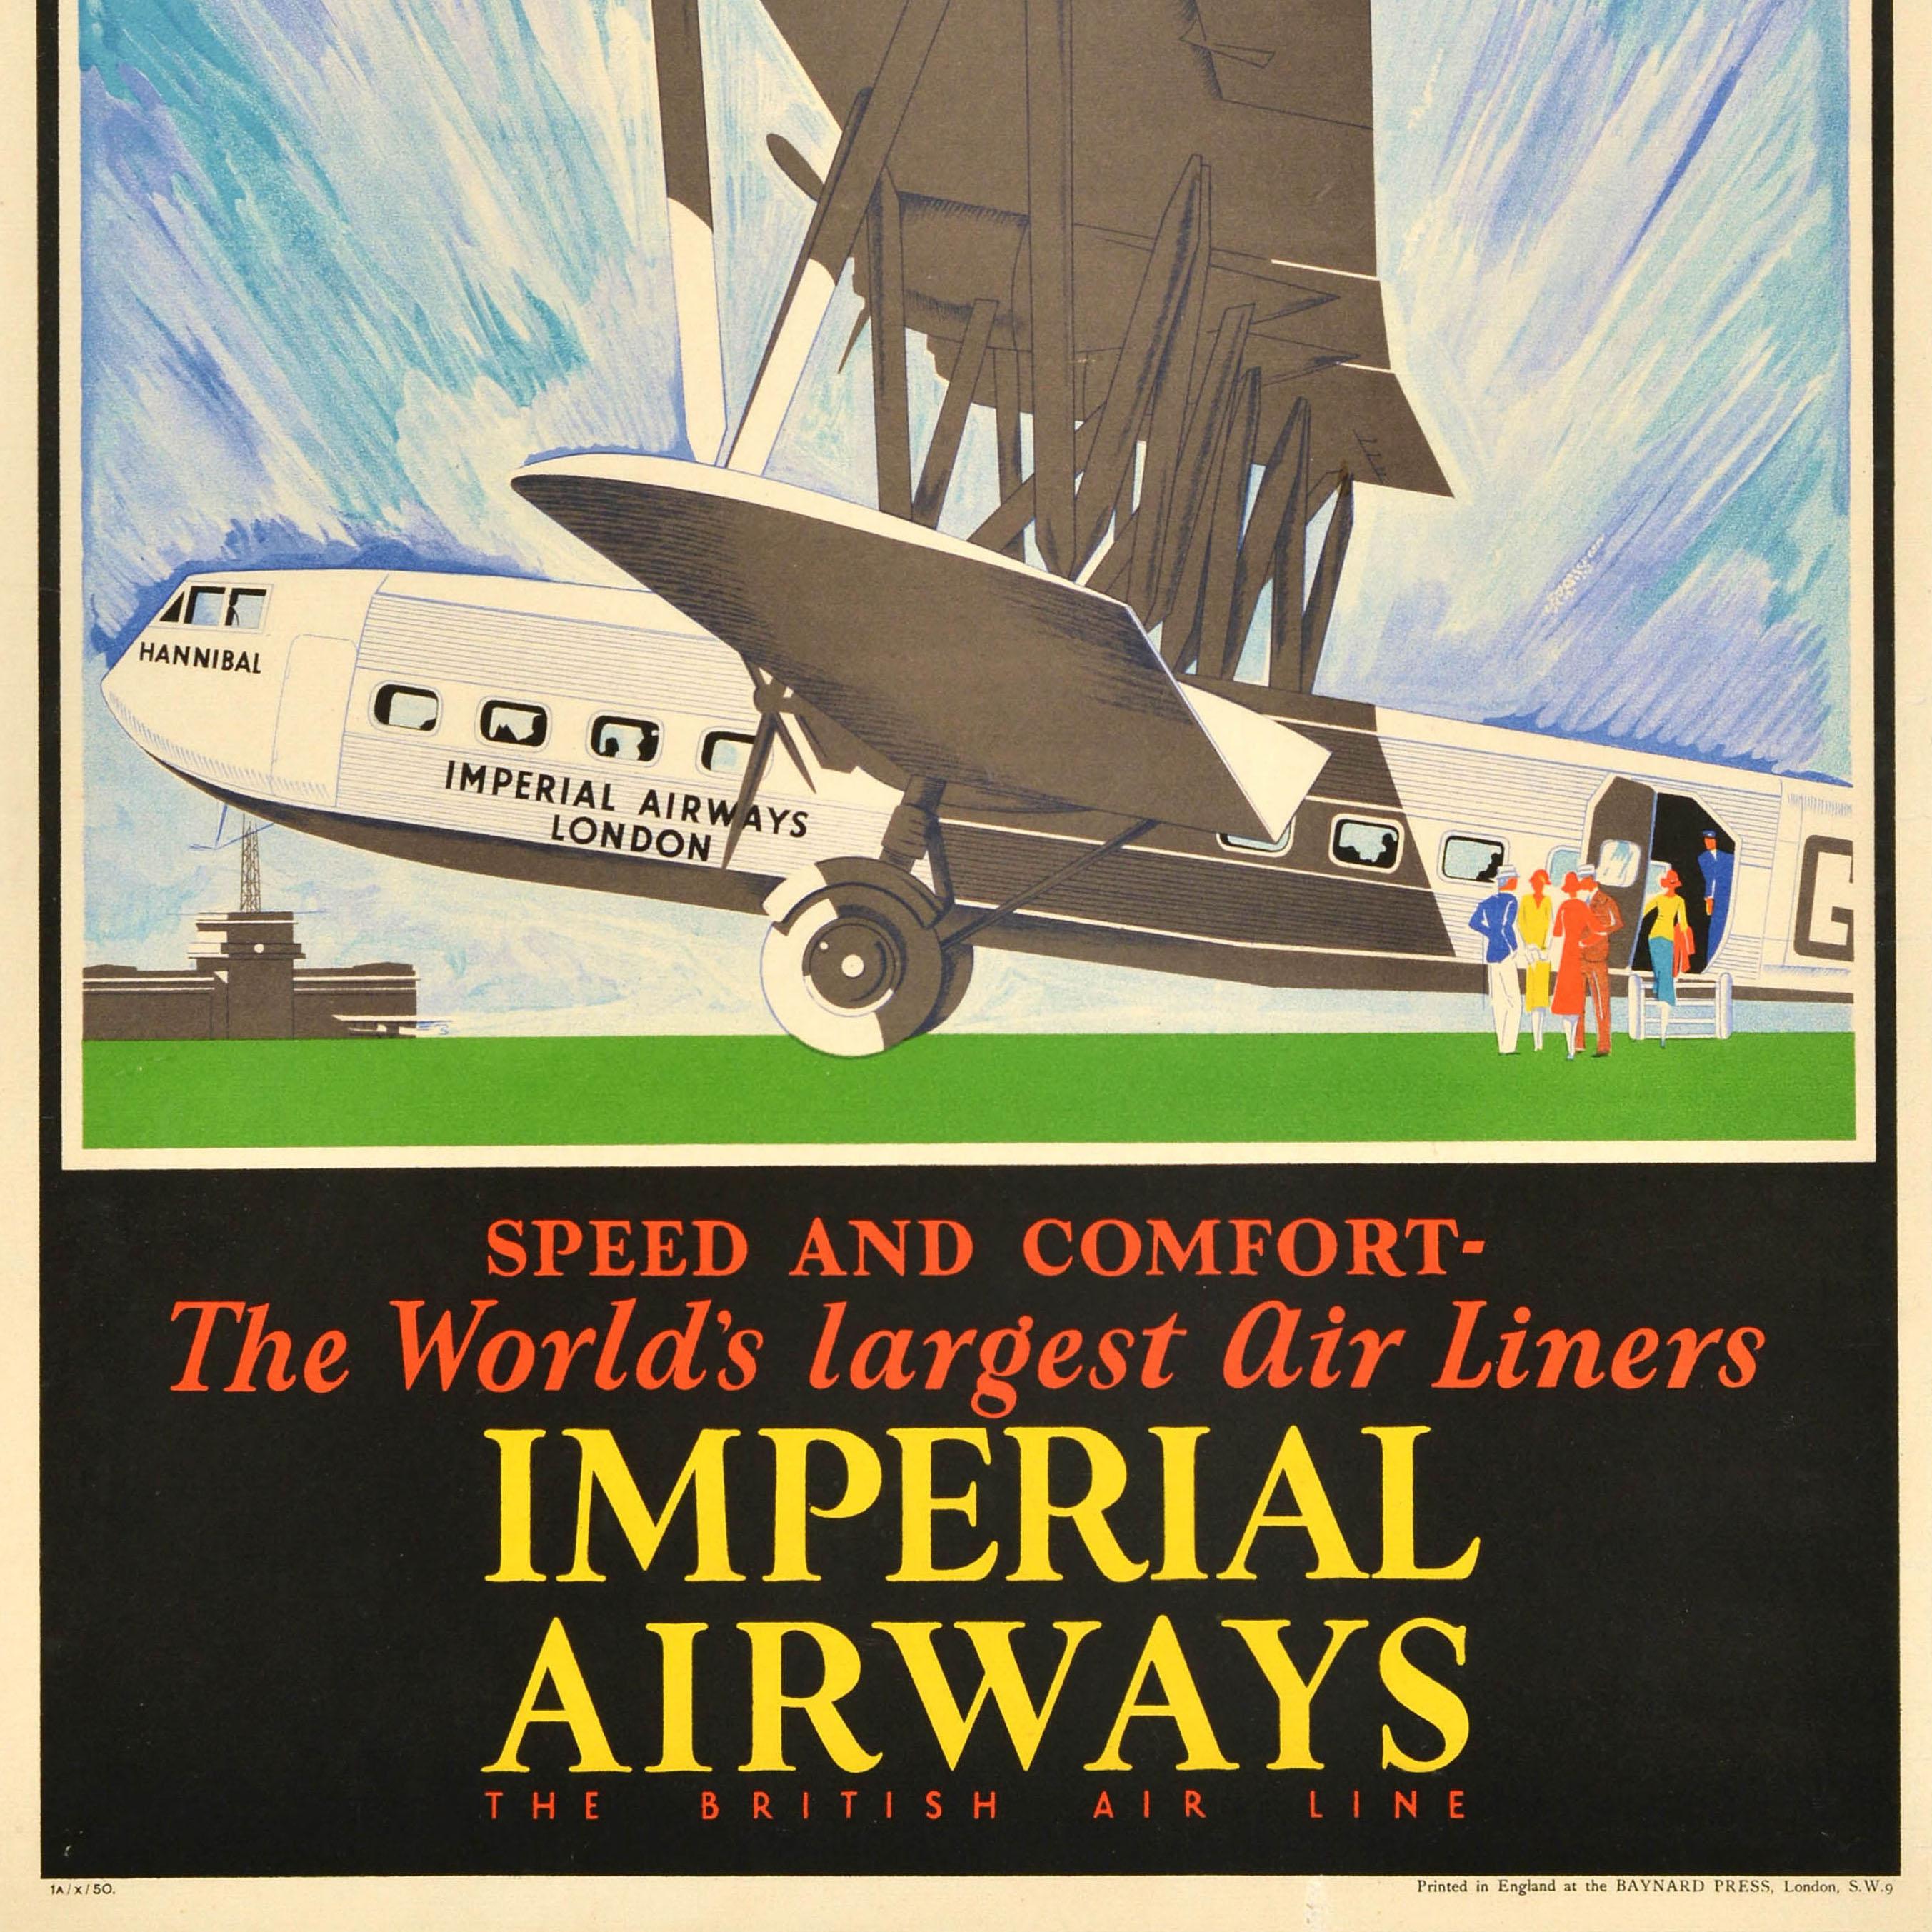 Original vintage travel advertising poster - Speed and Comfort The World's largest Air Liners Imperial Airways The British Air Line - featuring great artwork showing smartly dressed passengers chatting on the airfield with a lady boarding the